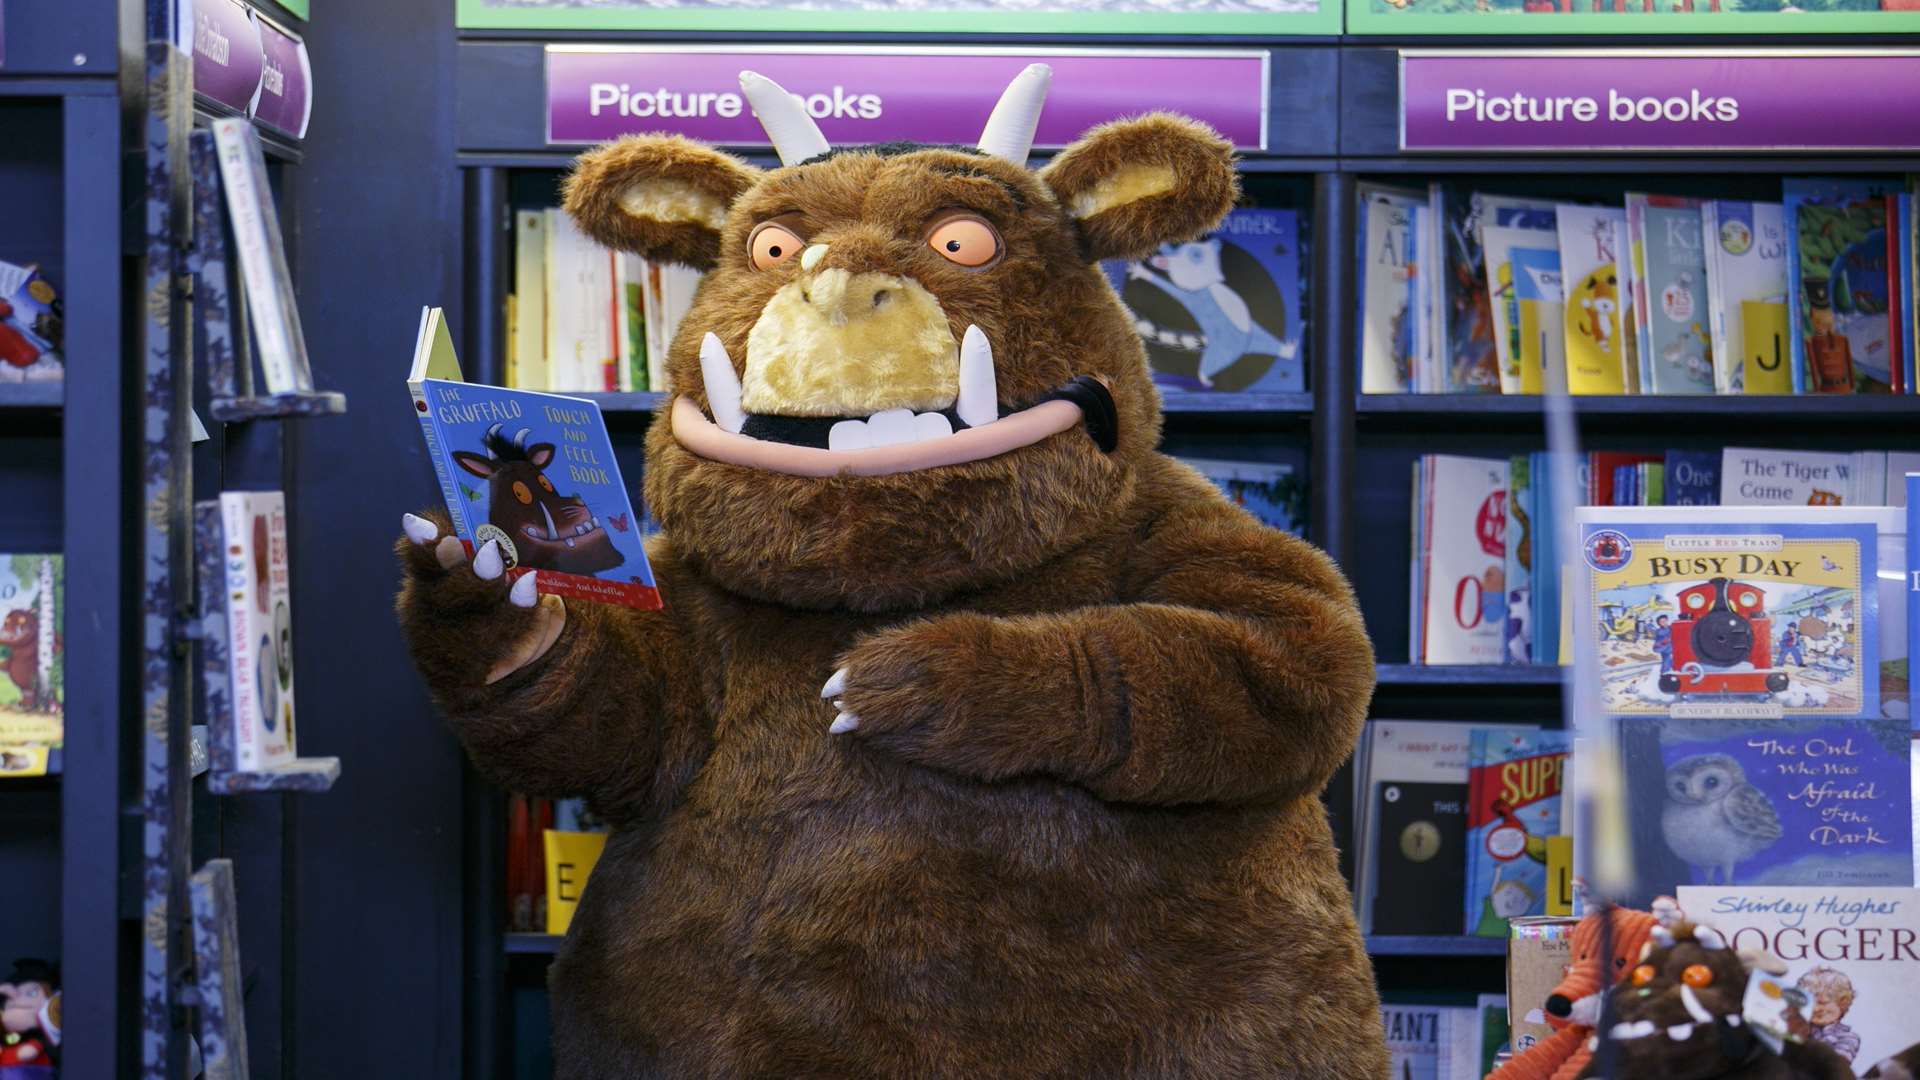 The Gruffalo catches up on his reading